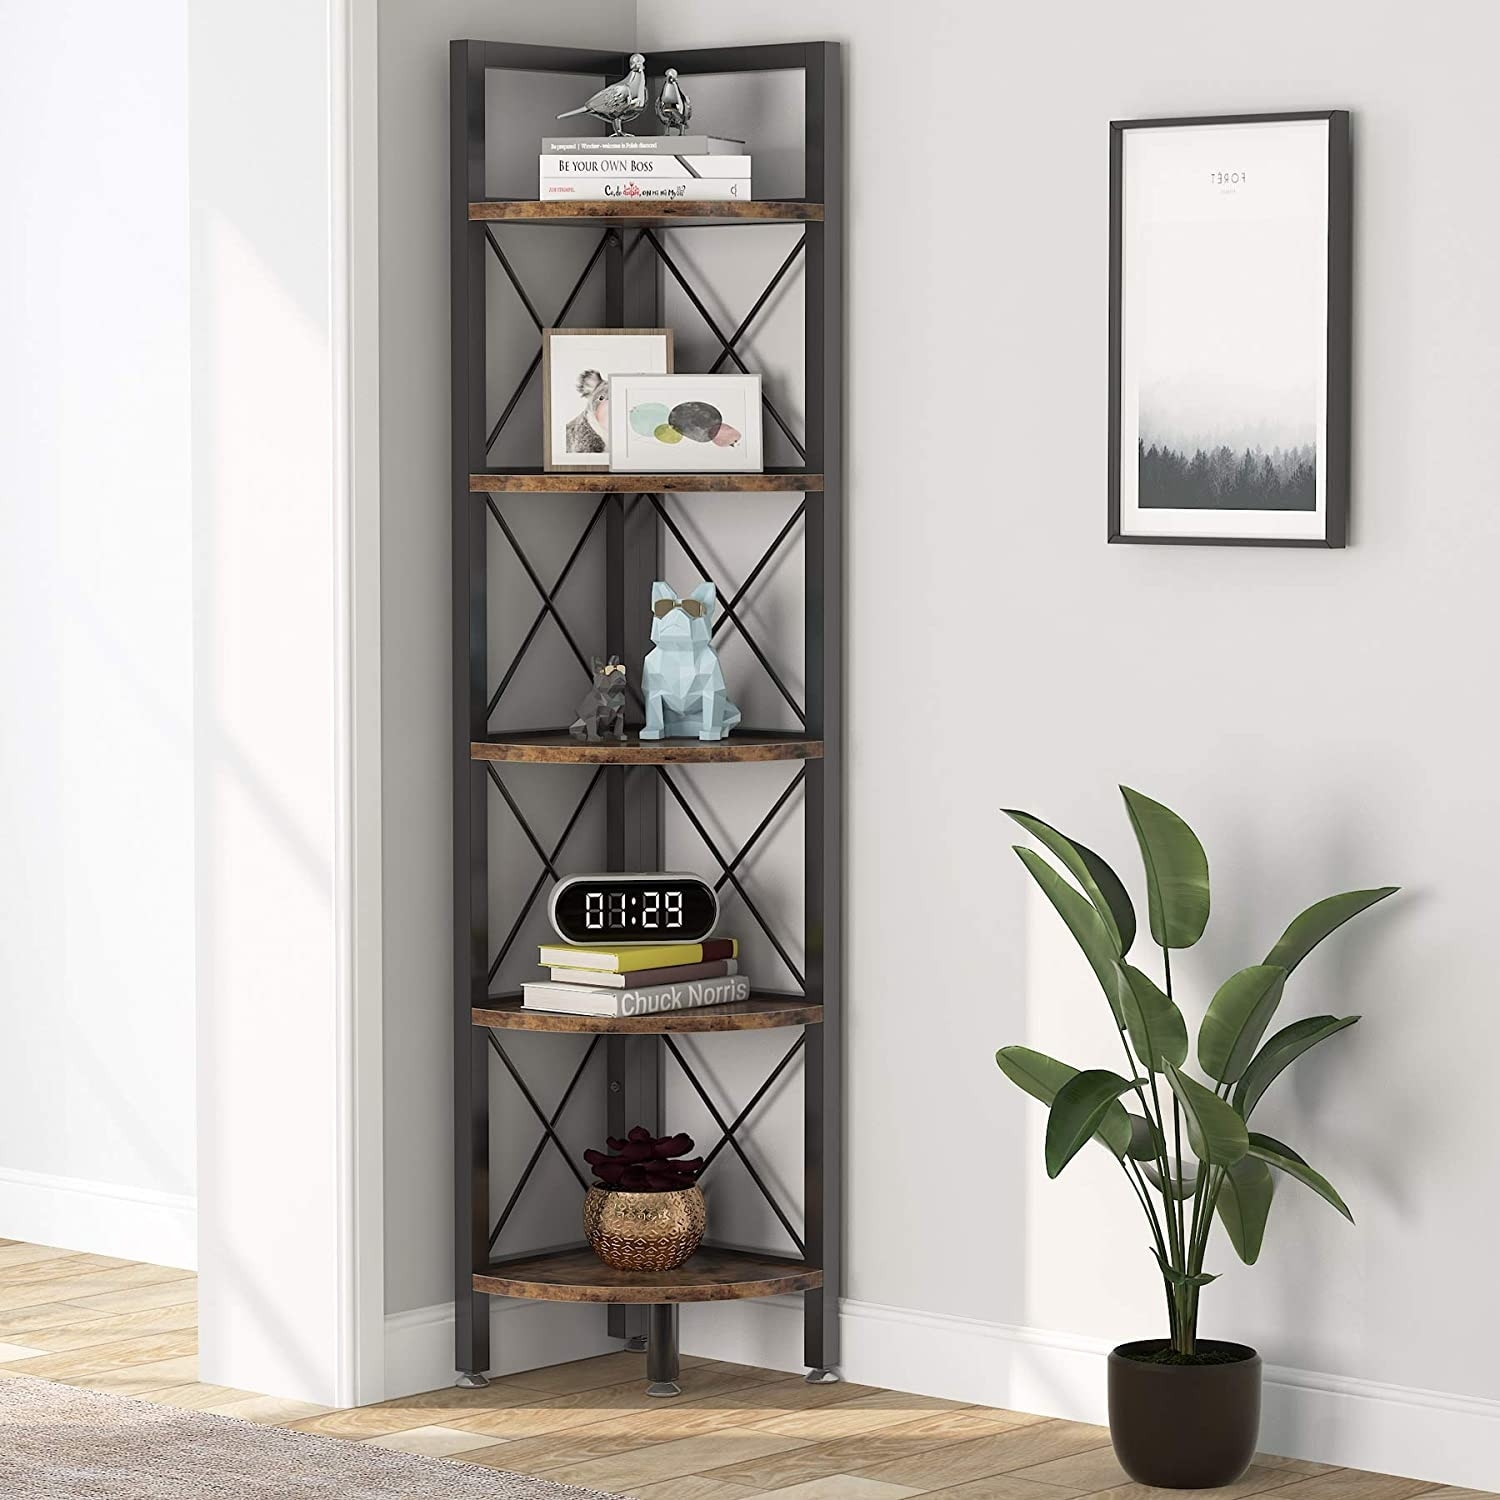 https://ak1.ostkcdn.com/images/products/is/images/direct/1273f1c92e733ca44df5fdc297992c08223a6358/Tribesigns-5-Tier-Corner-Shelves-Small-Bookshelf-Bookcase%2CCorner-Plant-Stand.jpg